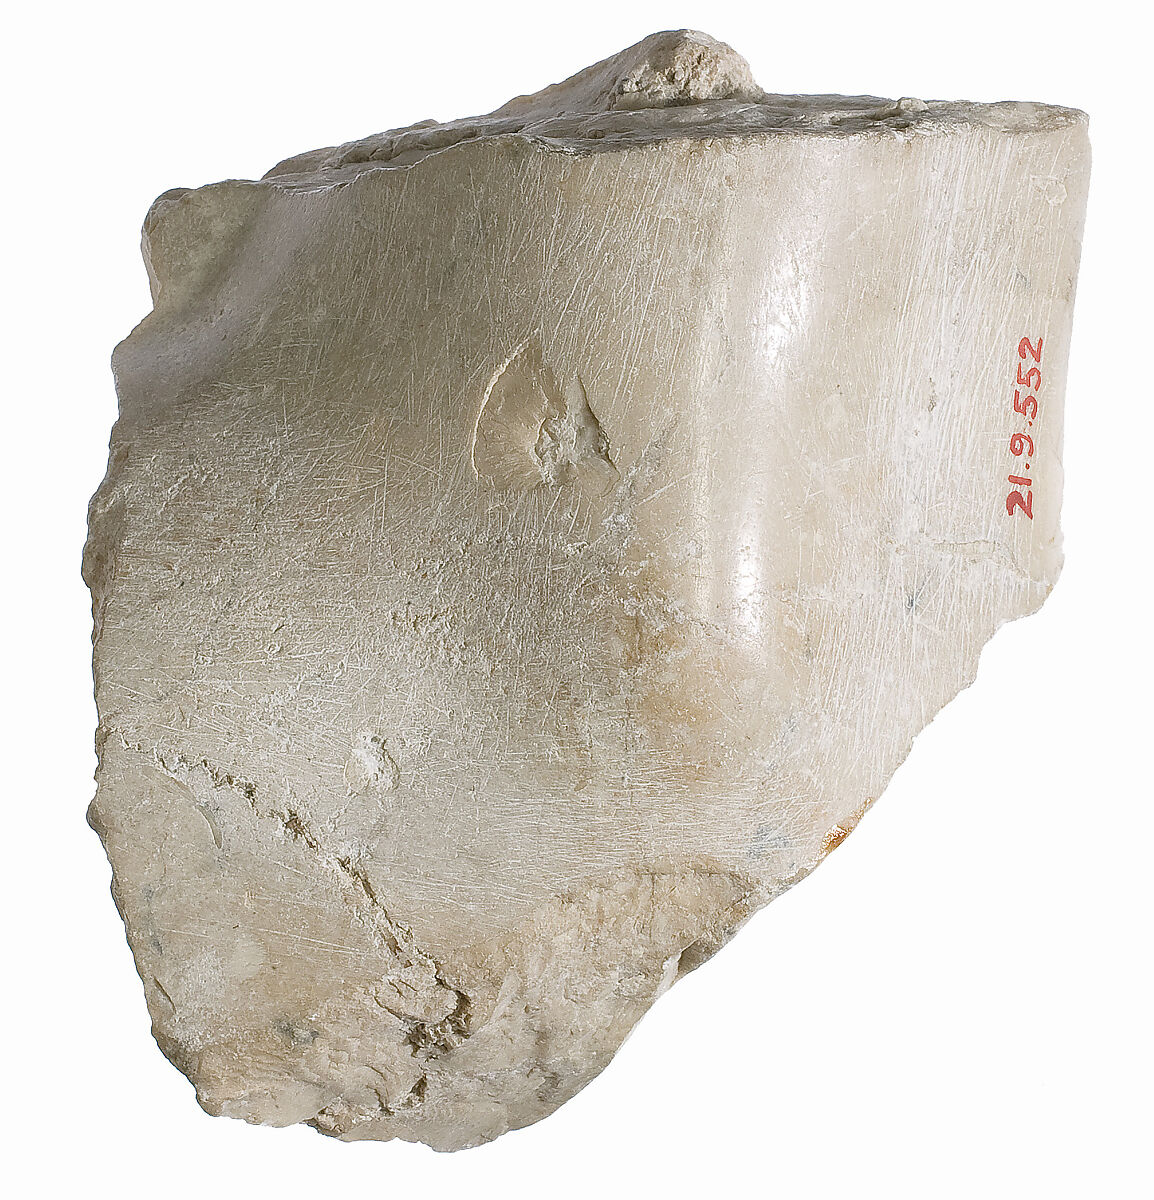 Foot fragment, Indurated limestone 